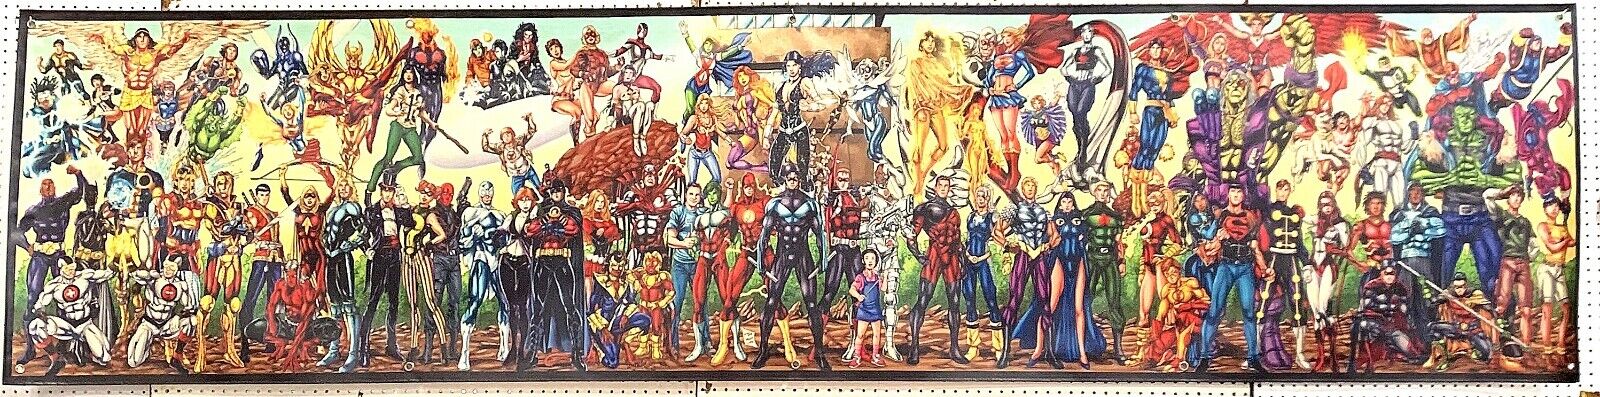 VERY RARE SUPER HEROES FROM MARVEL UNIVERSE VINYL BANNER 2014 HUGE SIZE 135\